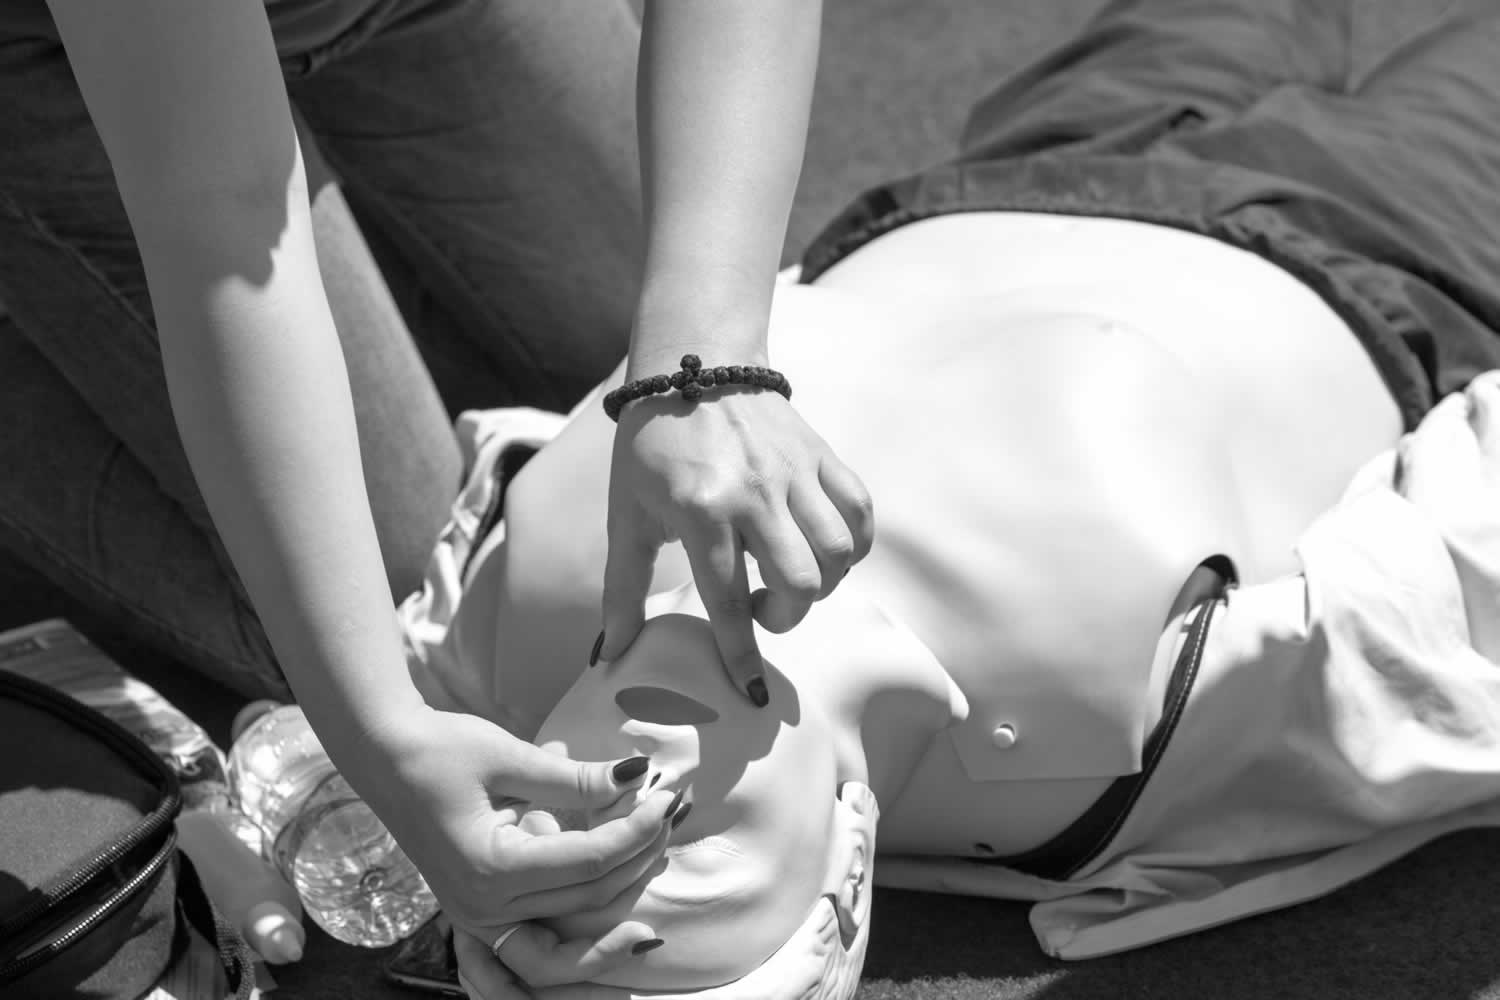 First Aid At Work Requalification